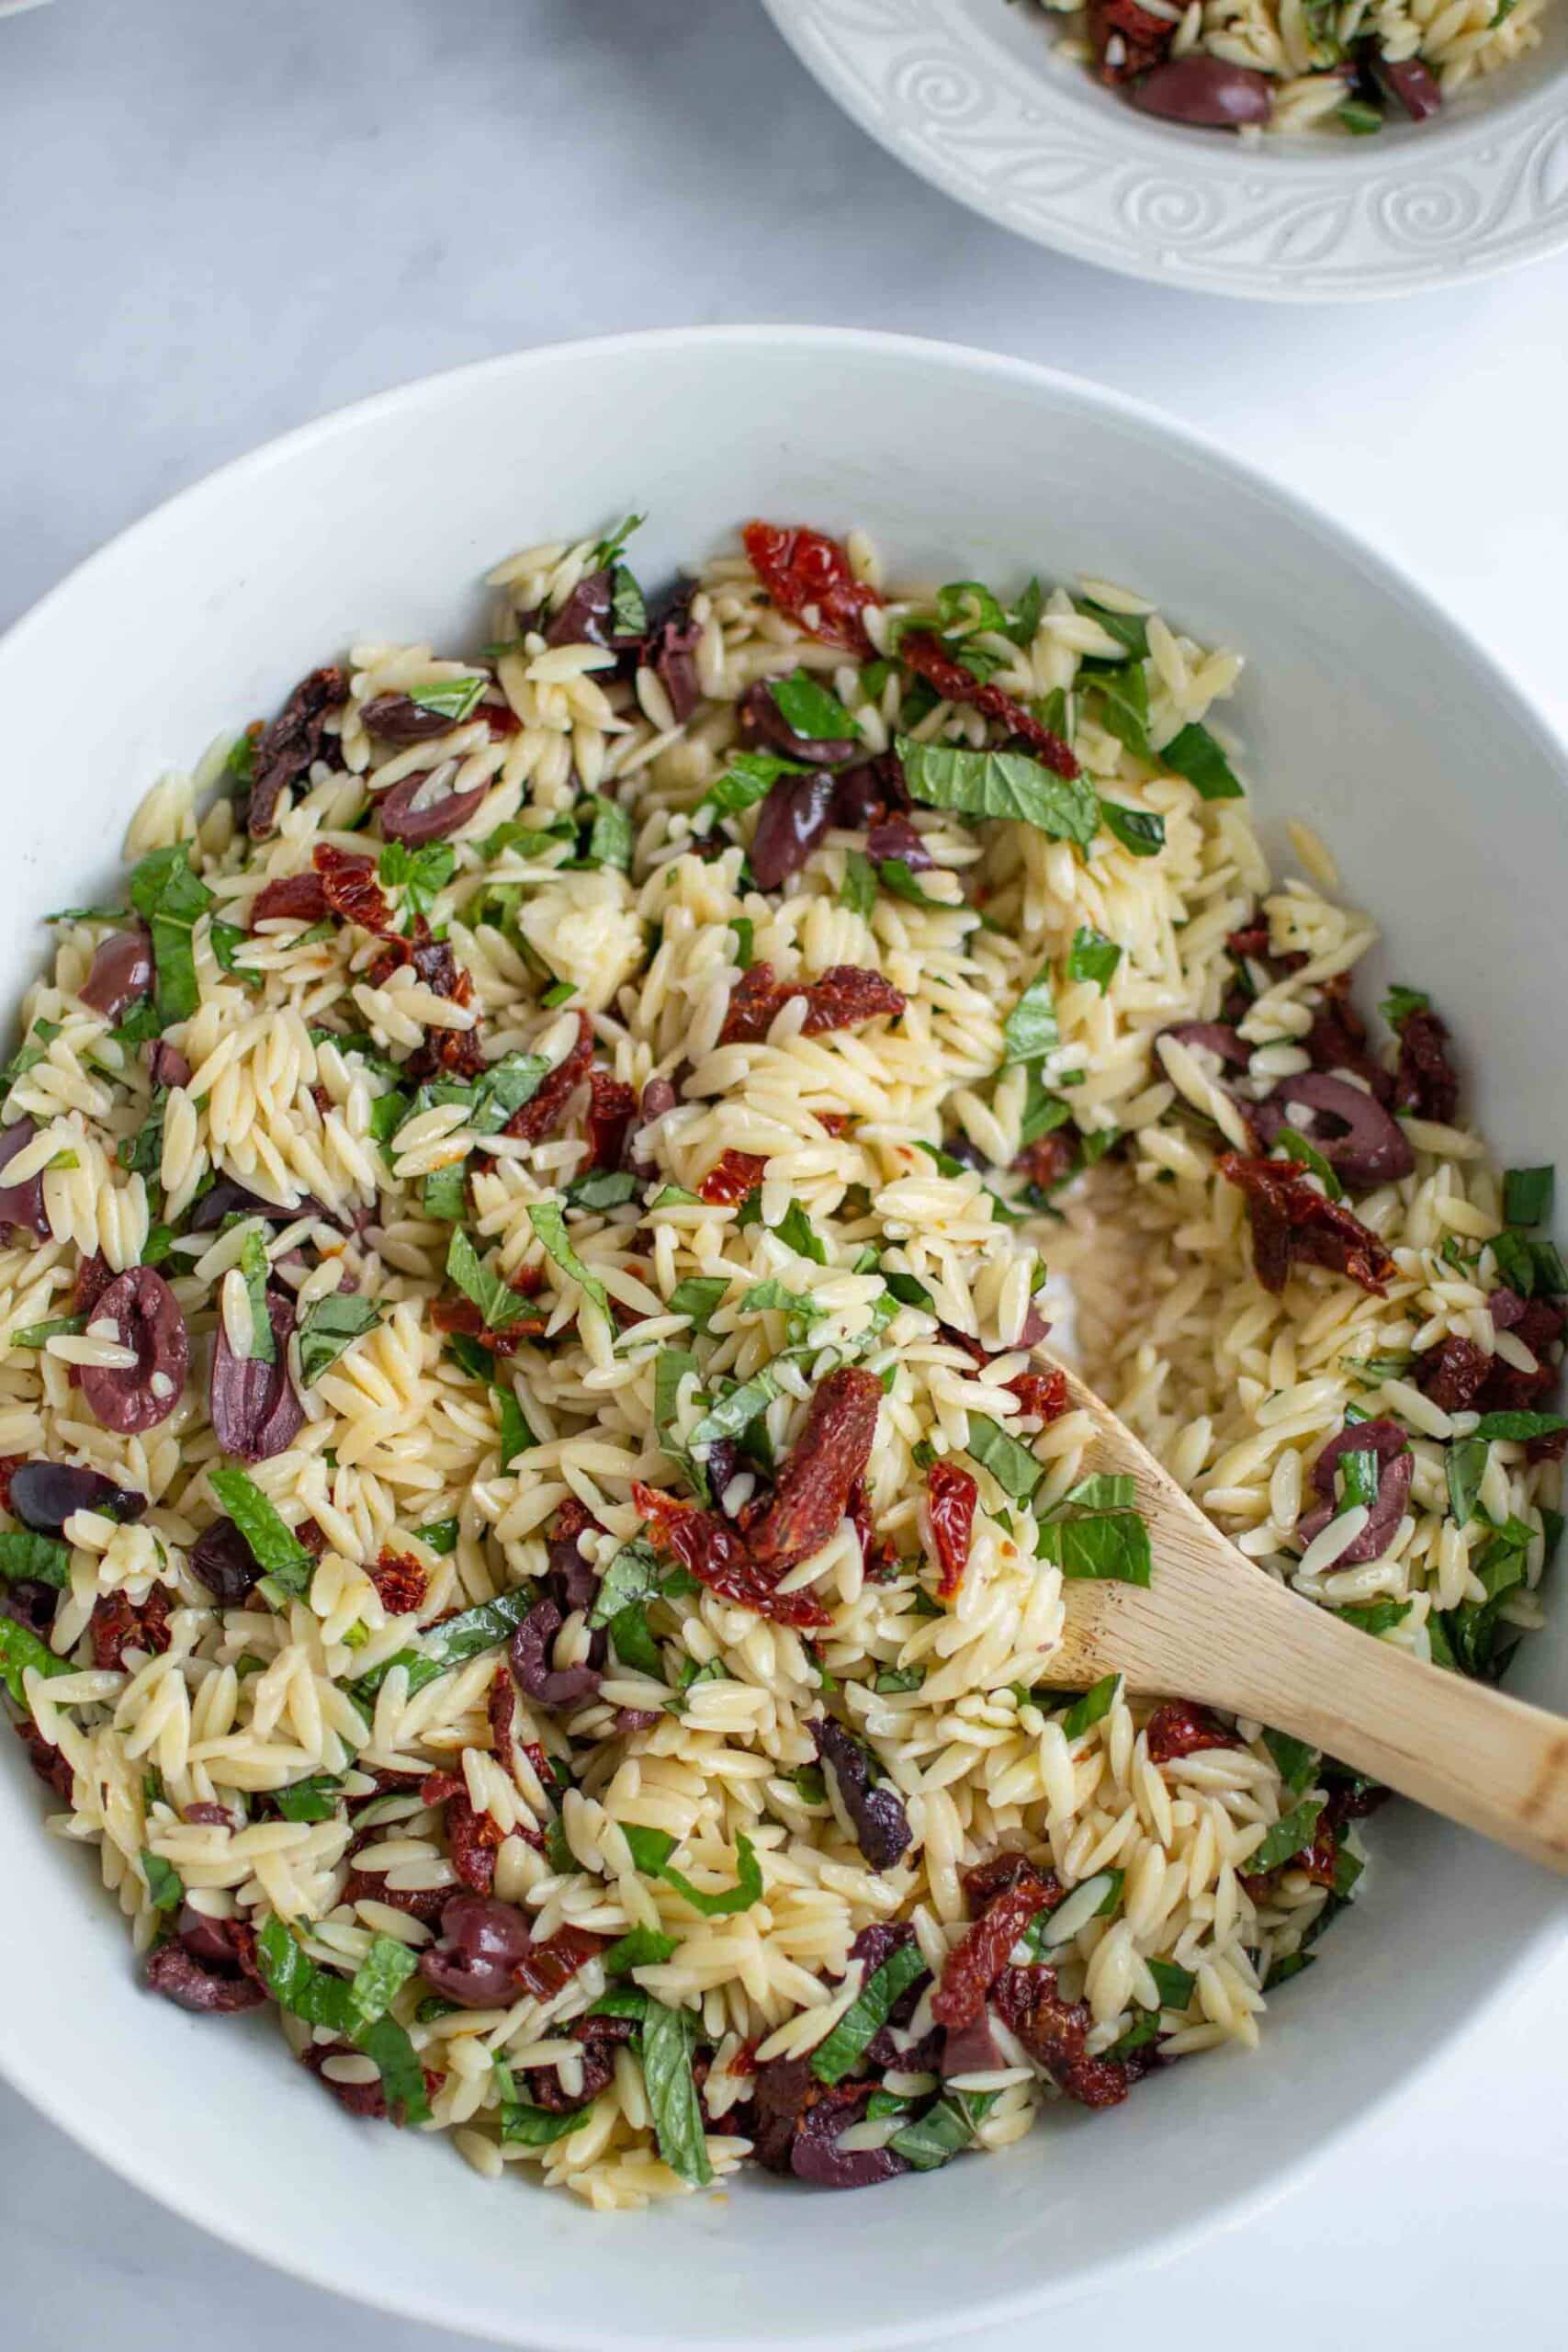 Orzo salad with olives sun dried tomatoes and fresh herbs in a large white bowl and wooden spoon.